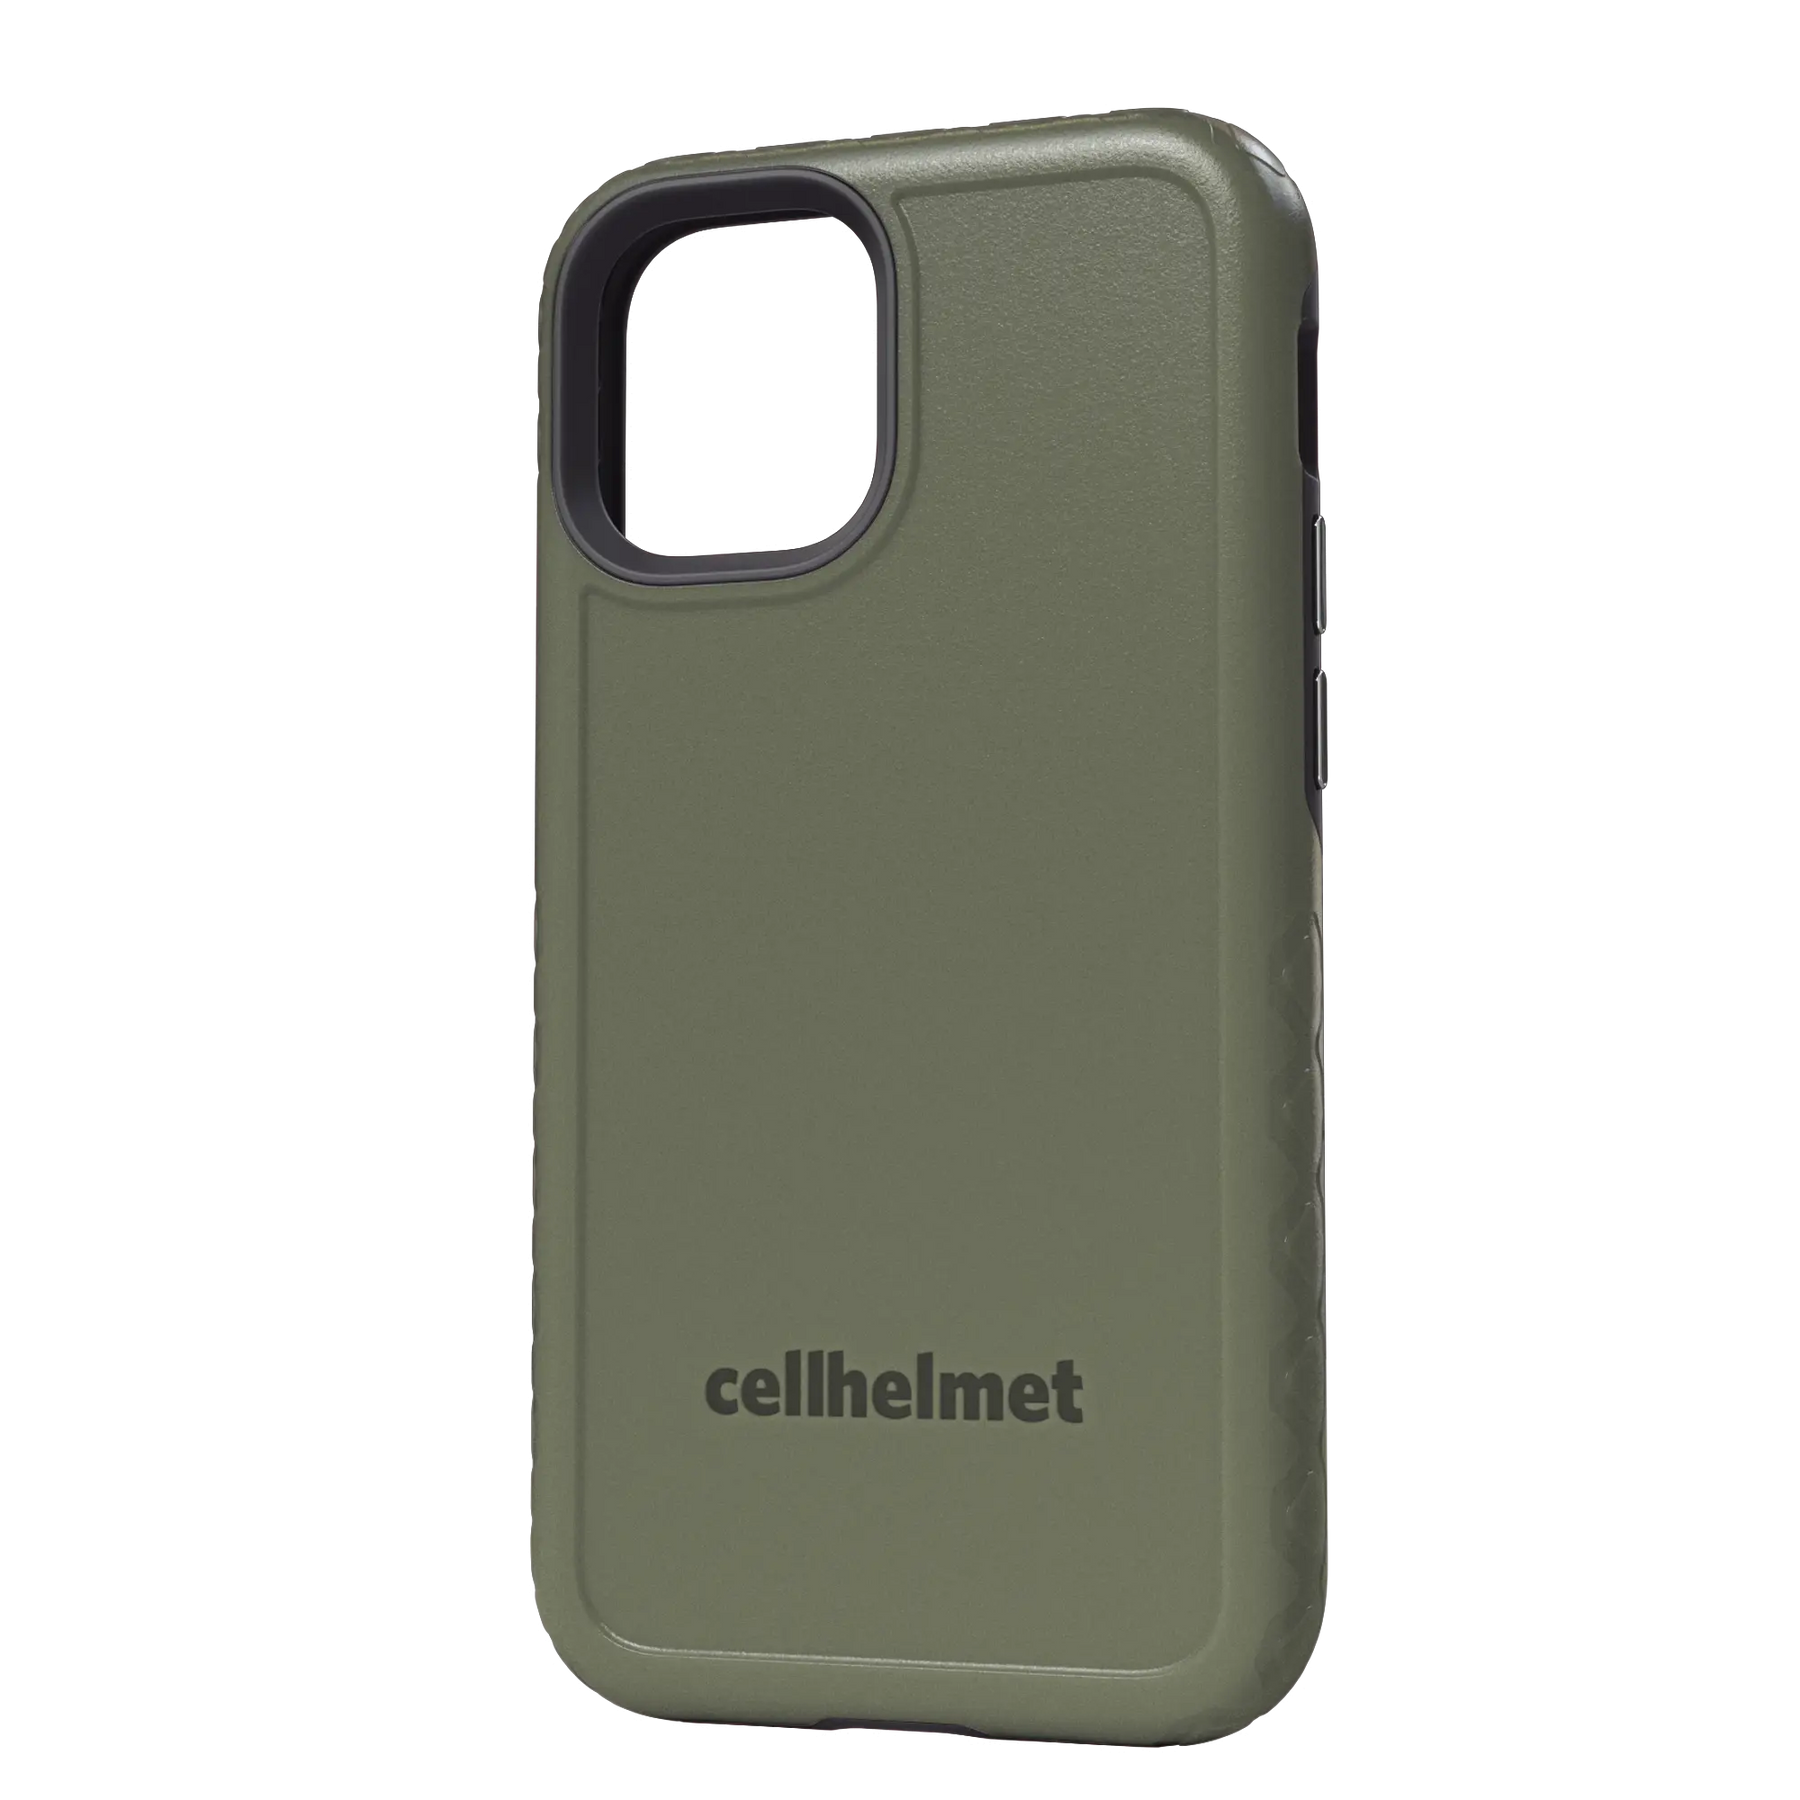 Green cellhelmet Personalized Case for iPhone 12 Mini